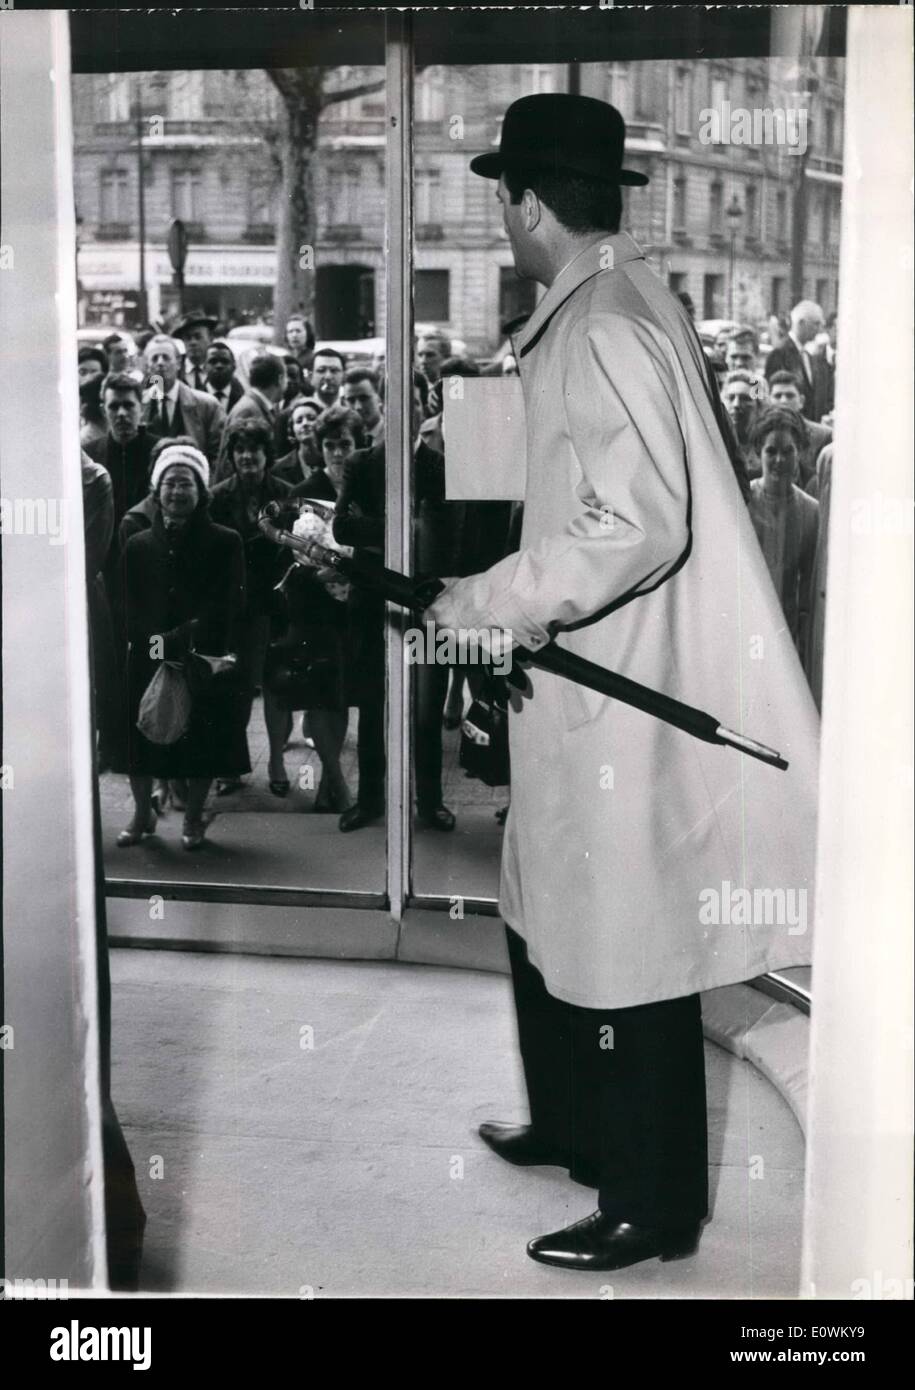 May 05, 1963 - Alive Models in the Show-window on the champs Elysee's: Three times a day a crowed gathers before the show-windows of a great ready-to-wear shop on the Champs-Elyse rs in Paris to Gaze at the live models who present the present collection. This presentation has such a success that probably many shops will follow. Photo shows An Amused Crowd watches the liveng models in the show Window Stock Photo